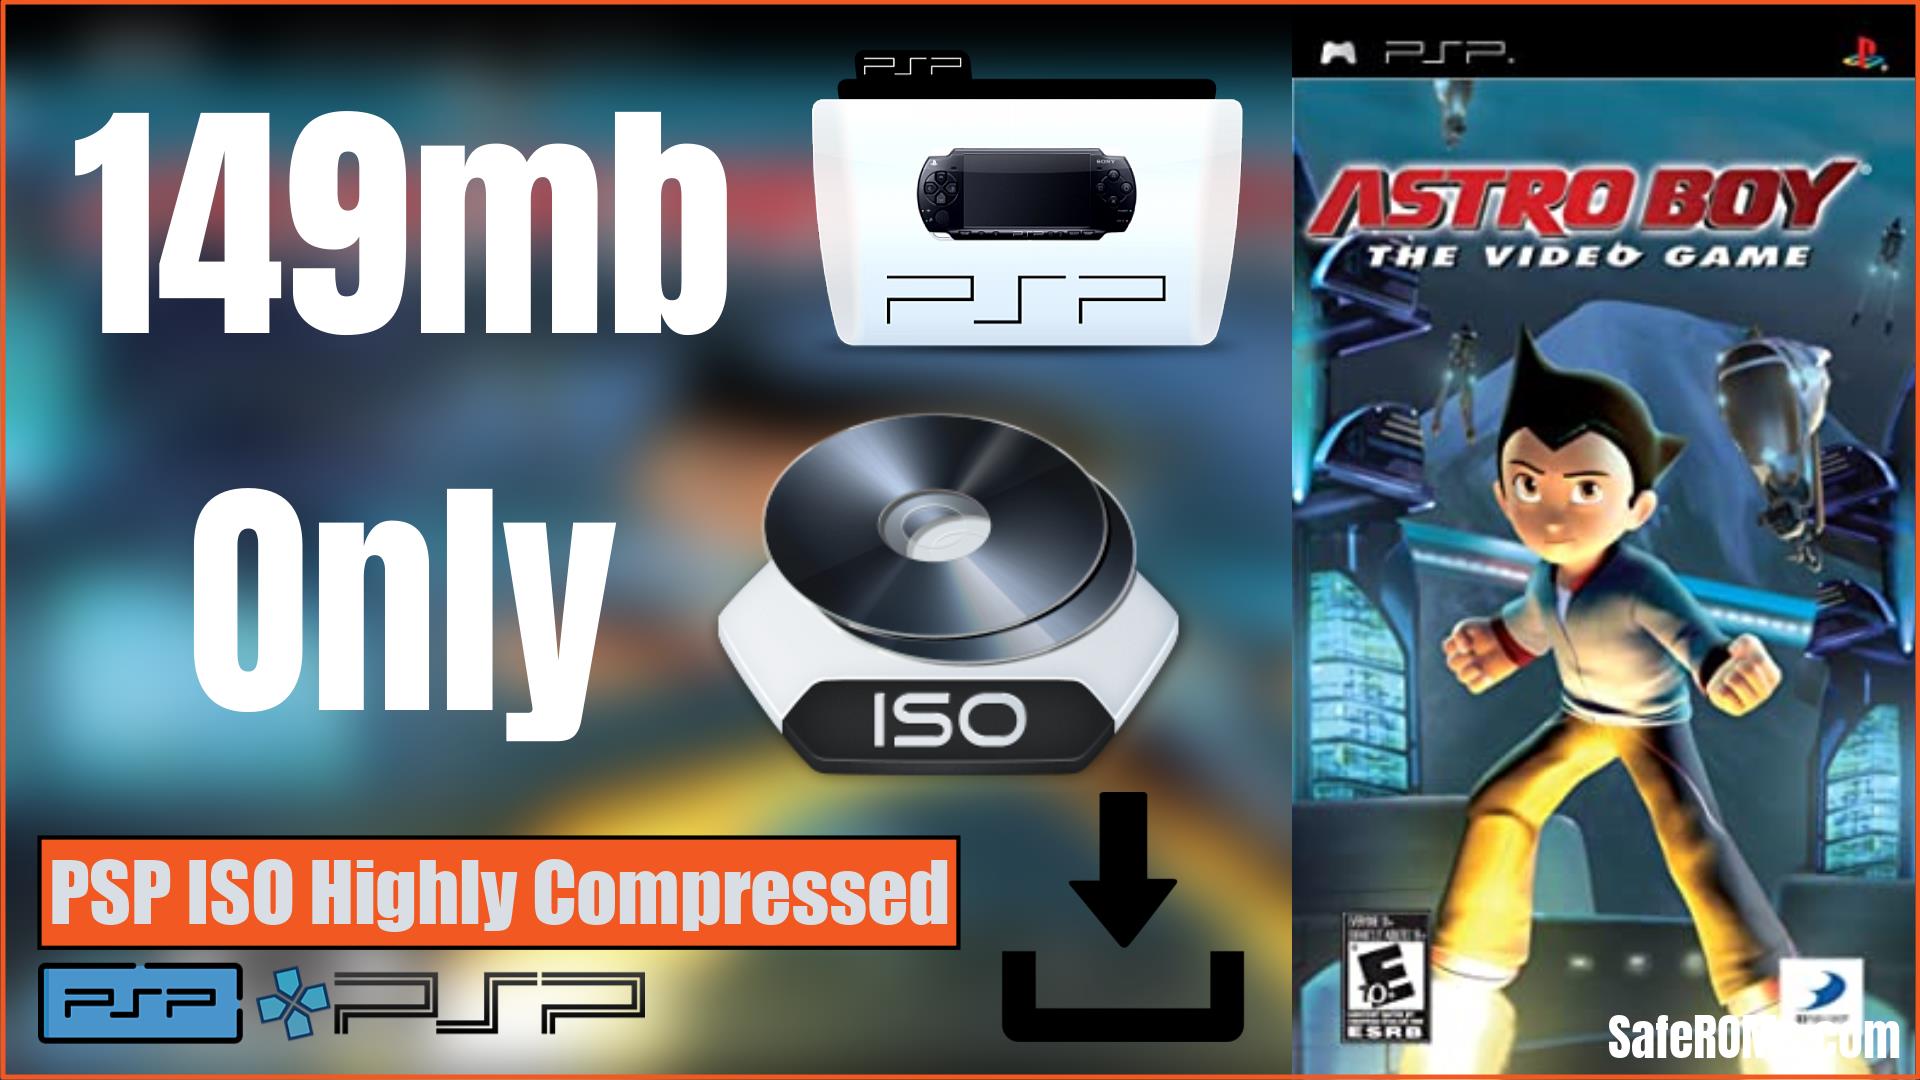 Astro Boy The Video Game PSP ISO Highly Compressed